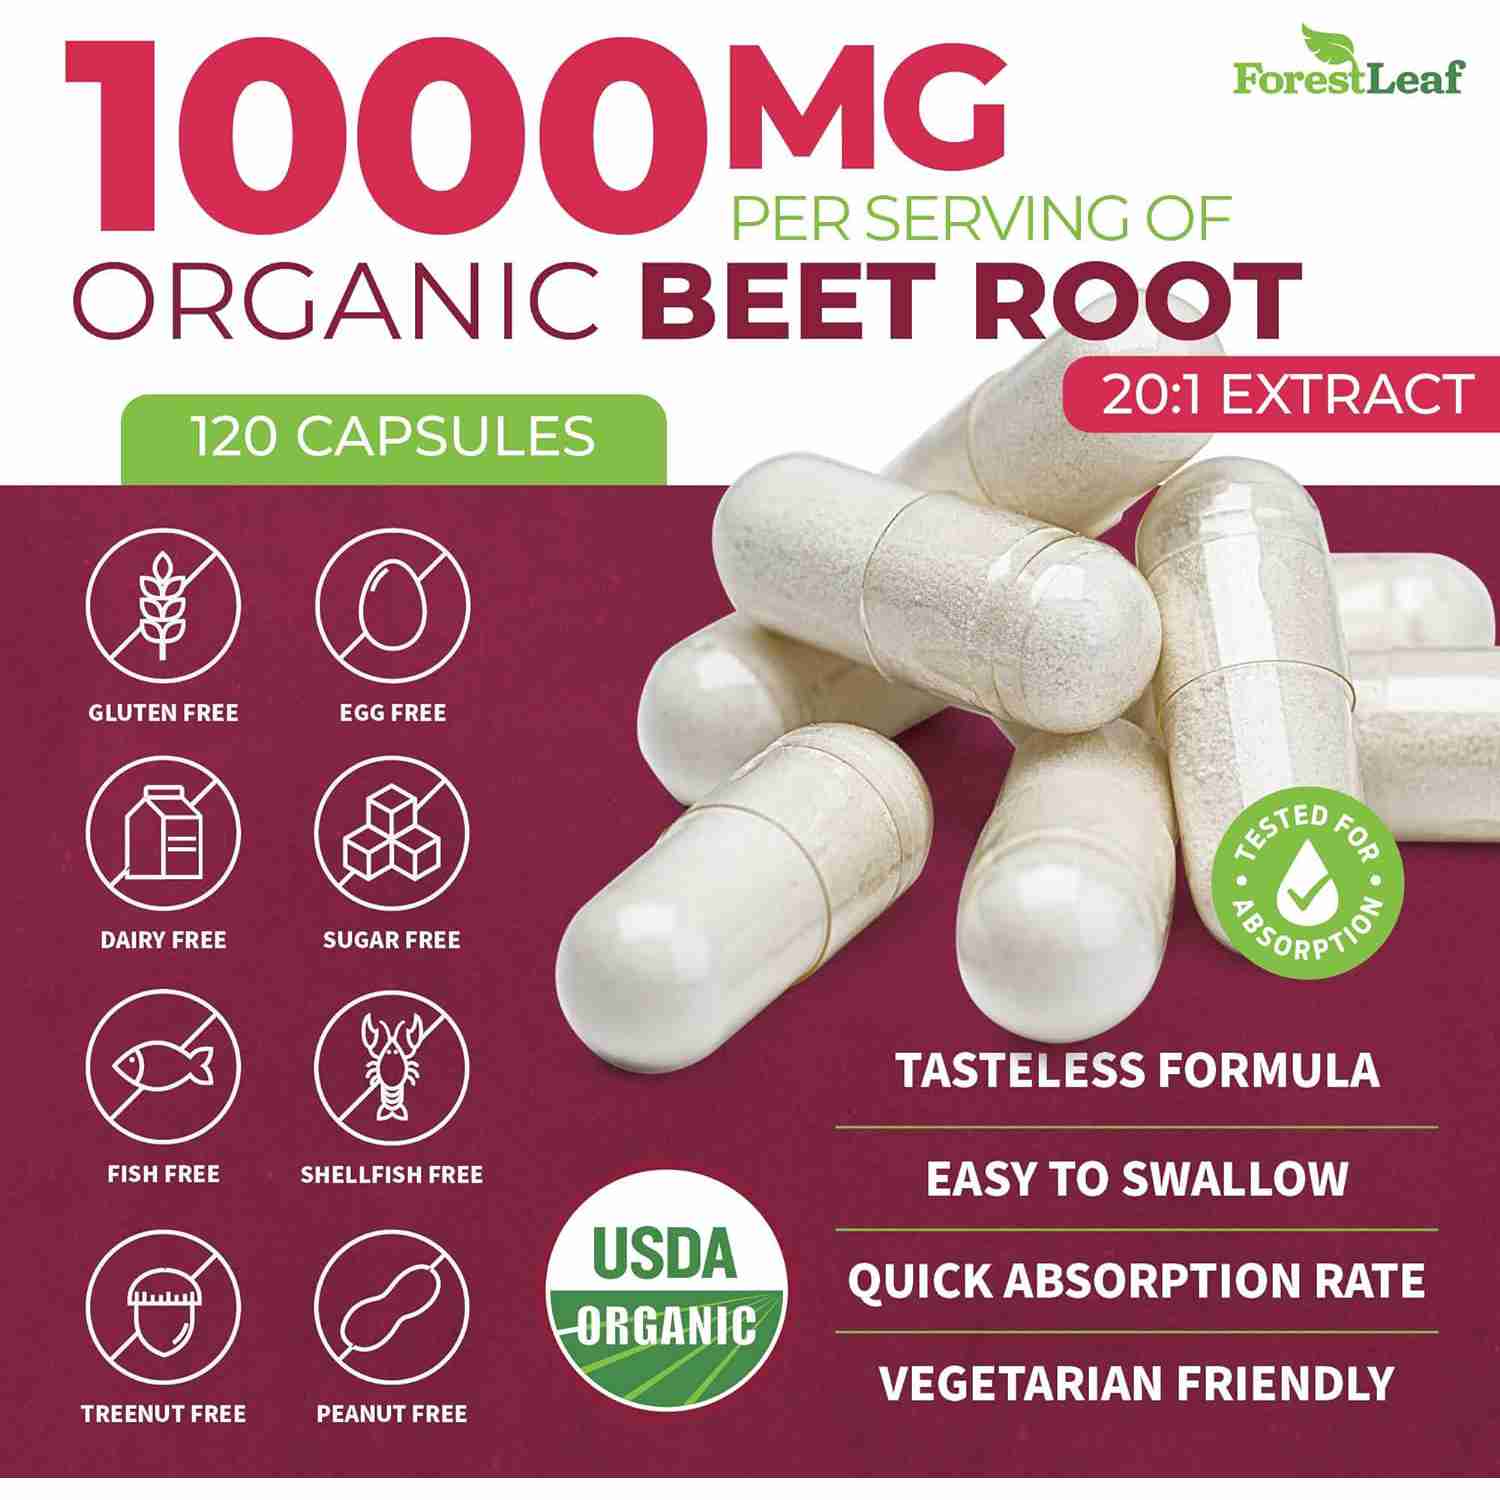 beet-root for cheap